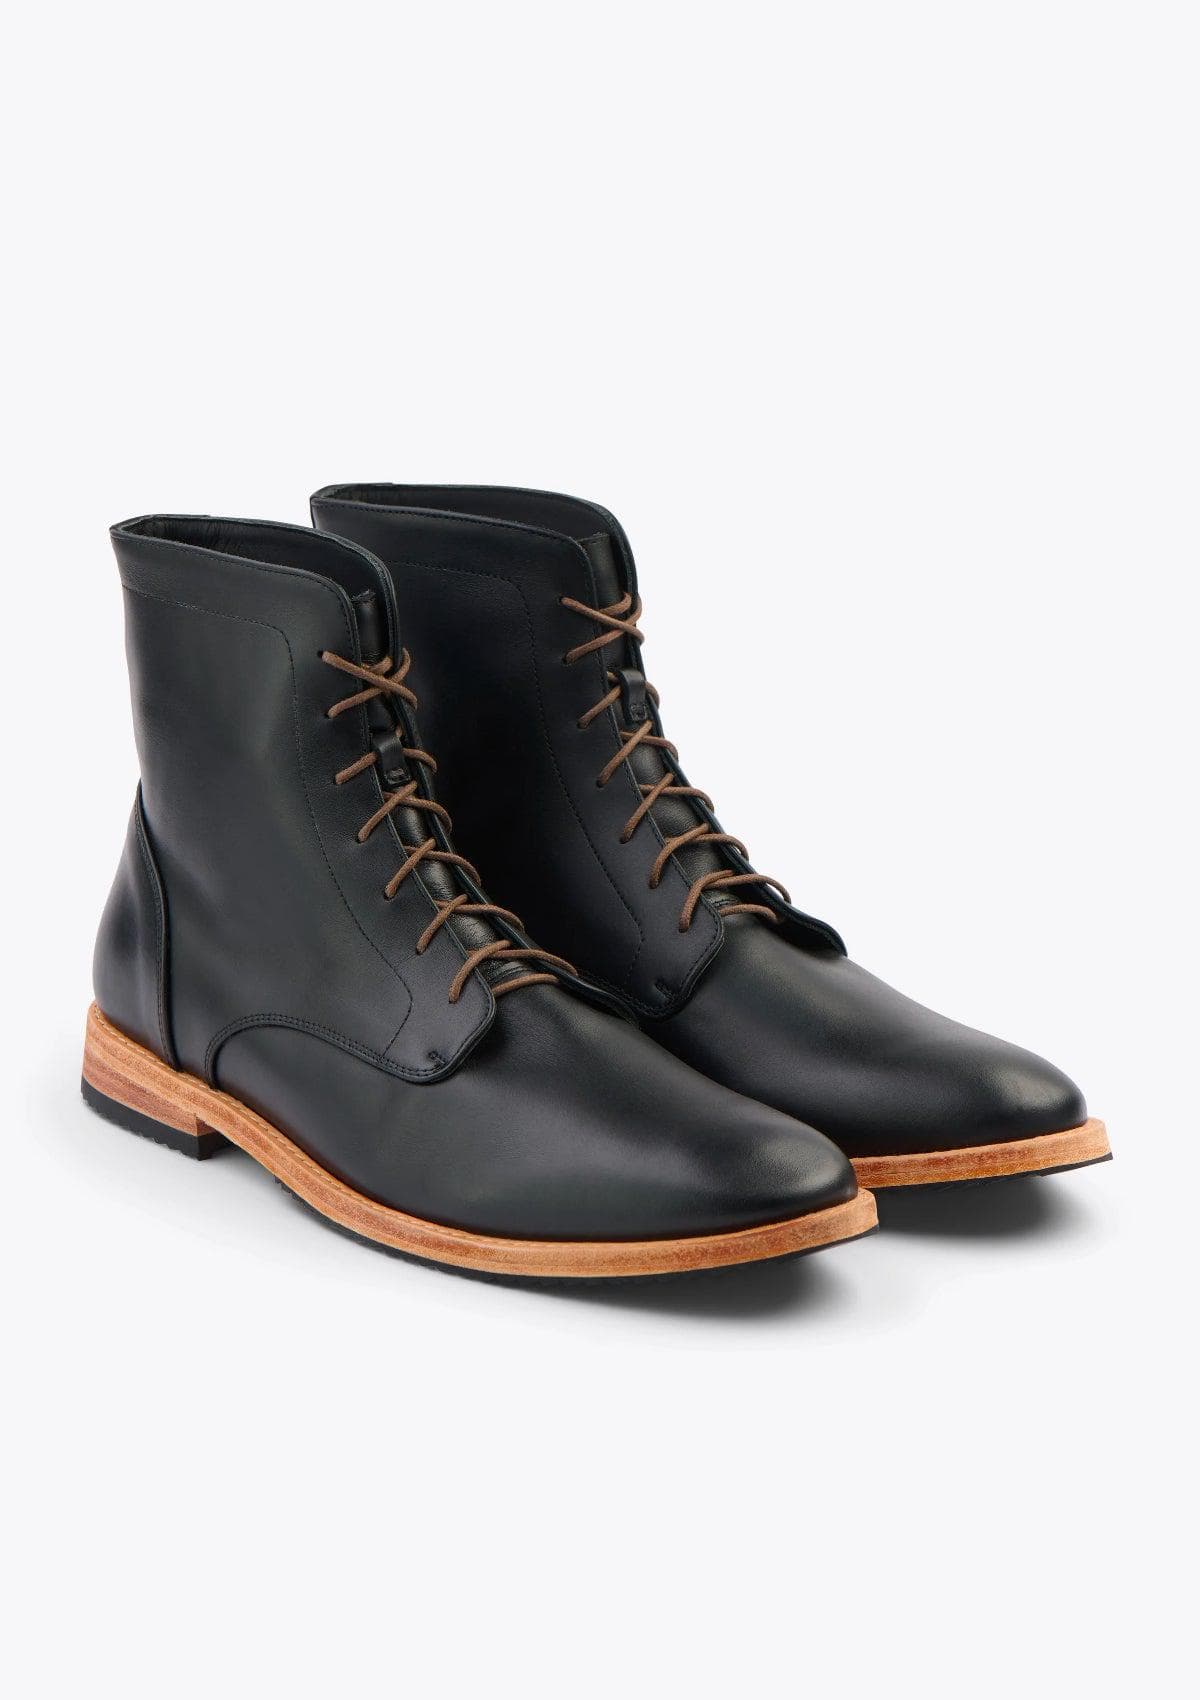 Nisolo Everyday Lace Up Boot - Black